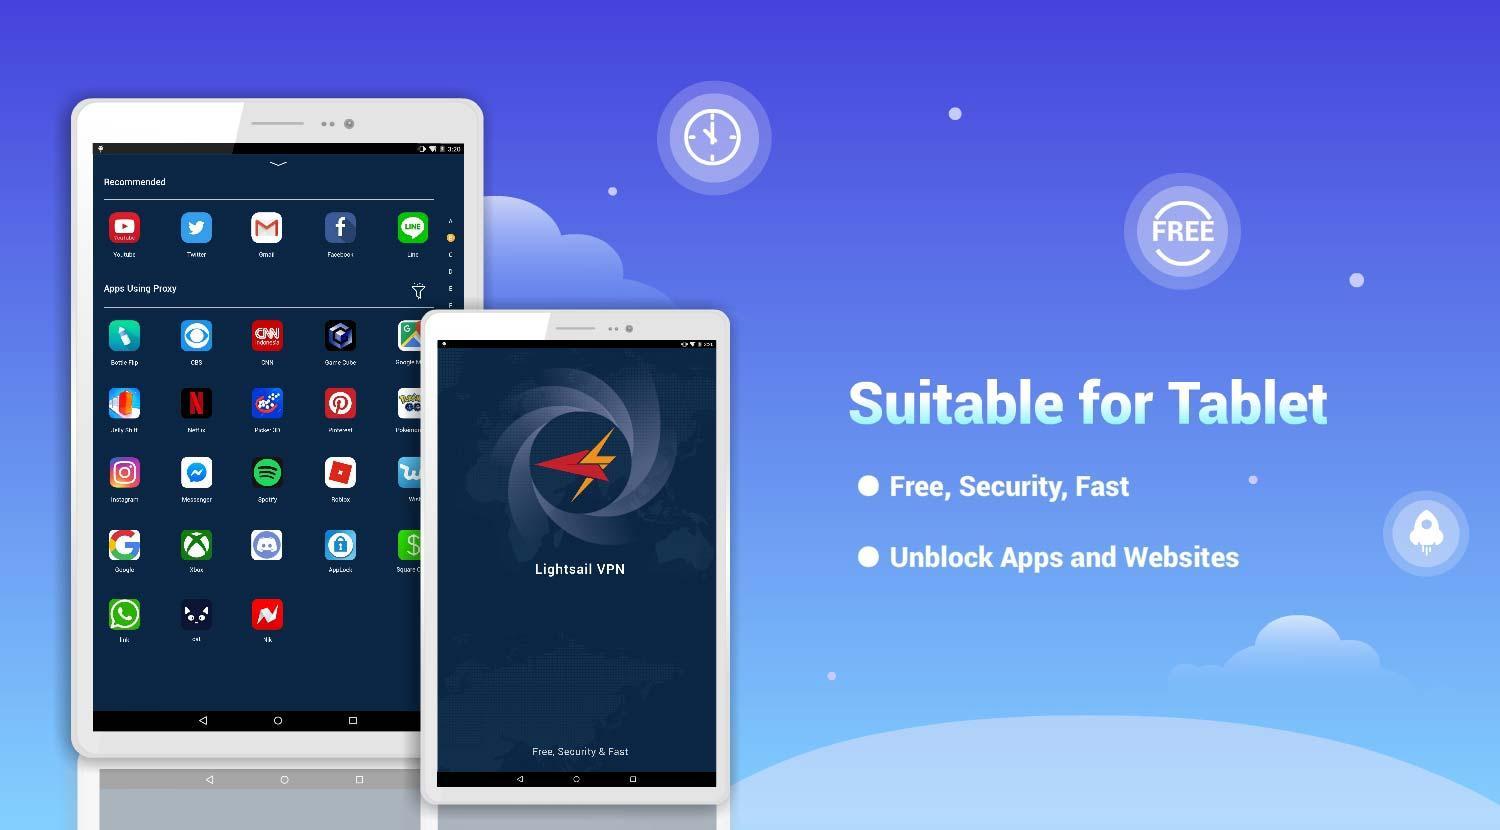 LightSail VPN, unblock websites and apps for free